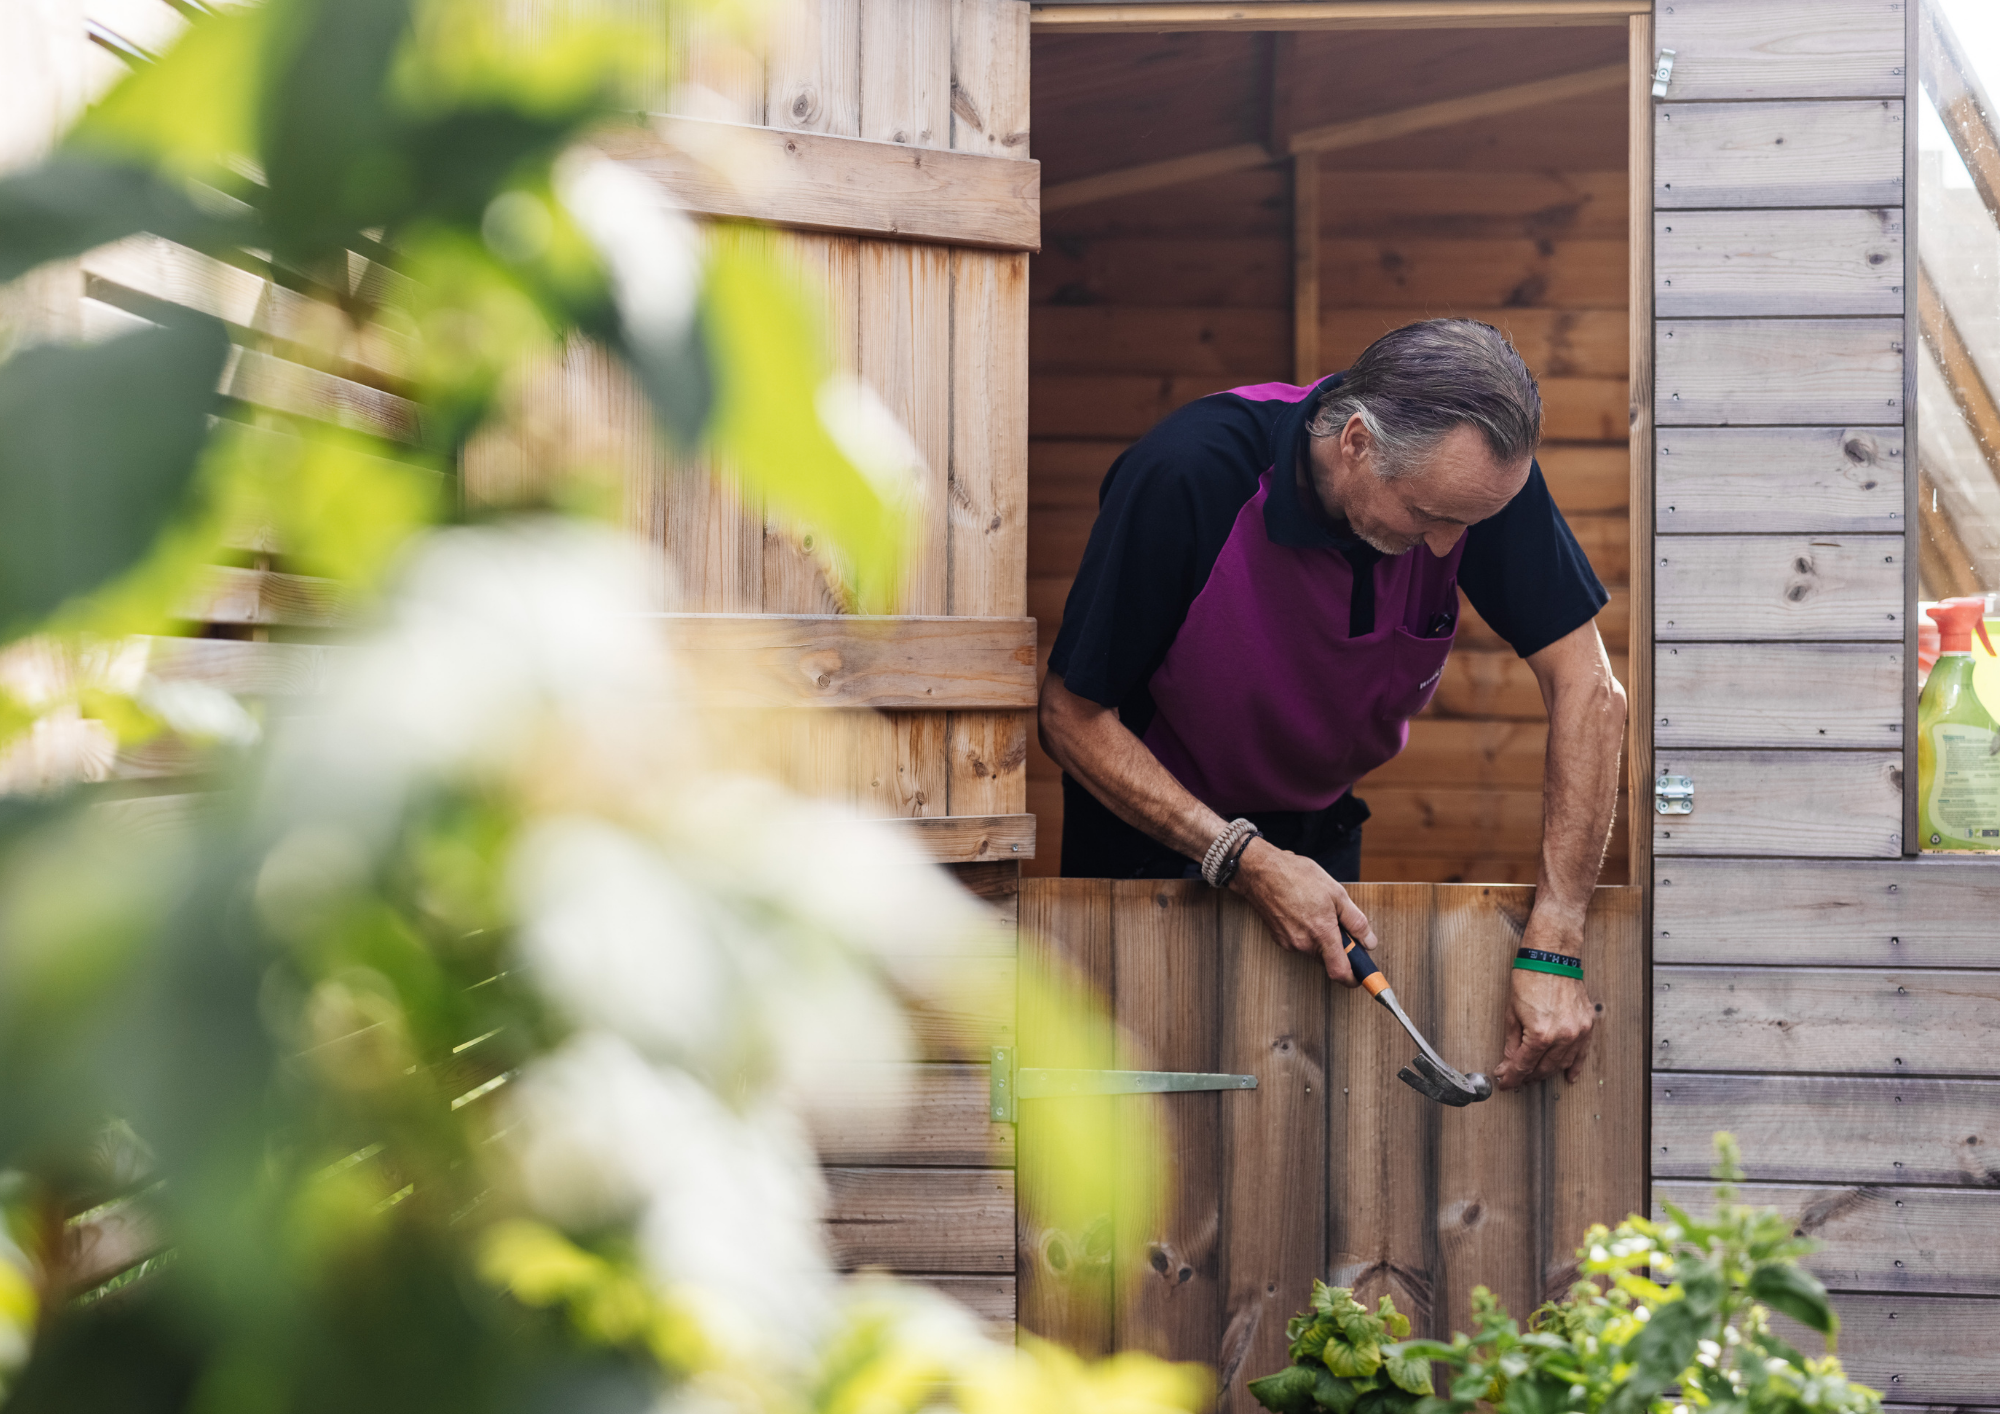 Garden sheds, arbours & conservatories - We can install, fix & maintain them for you. Just call Hire A Hubby!